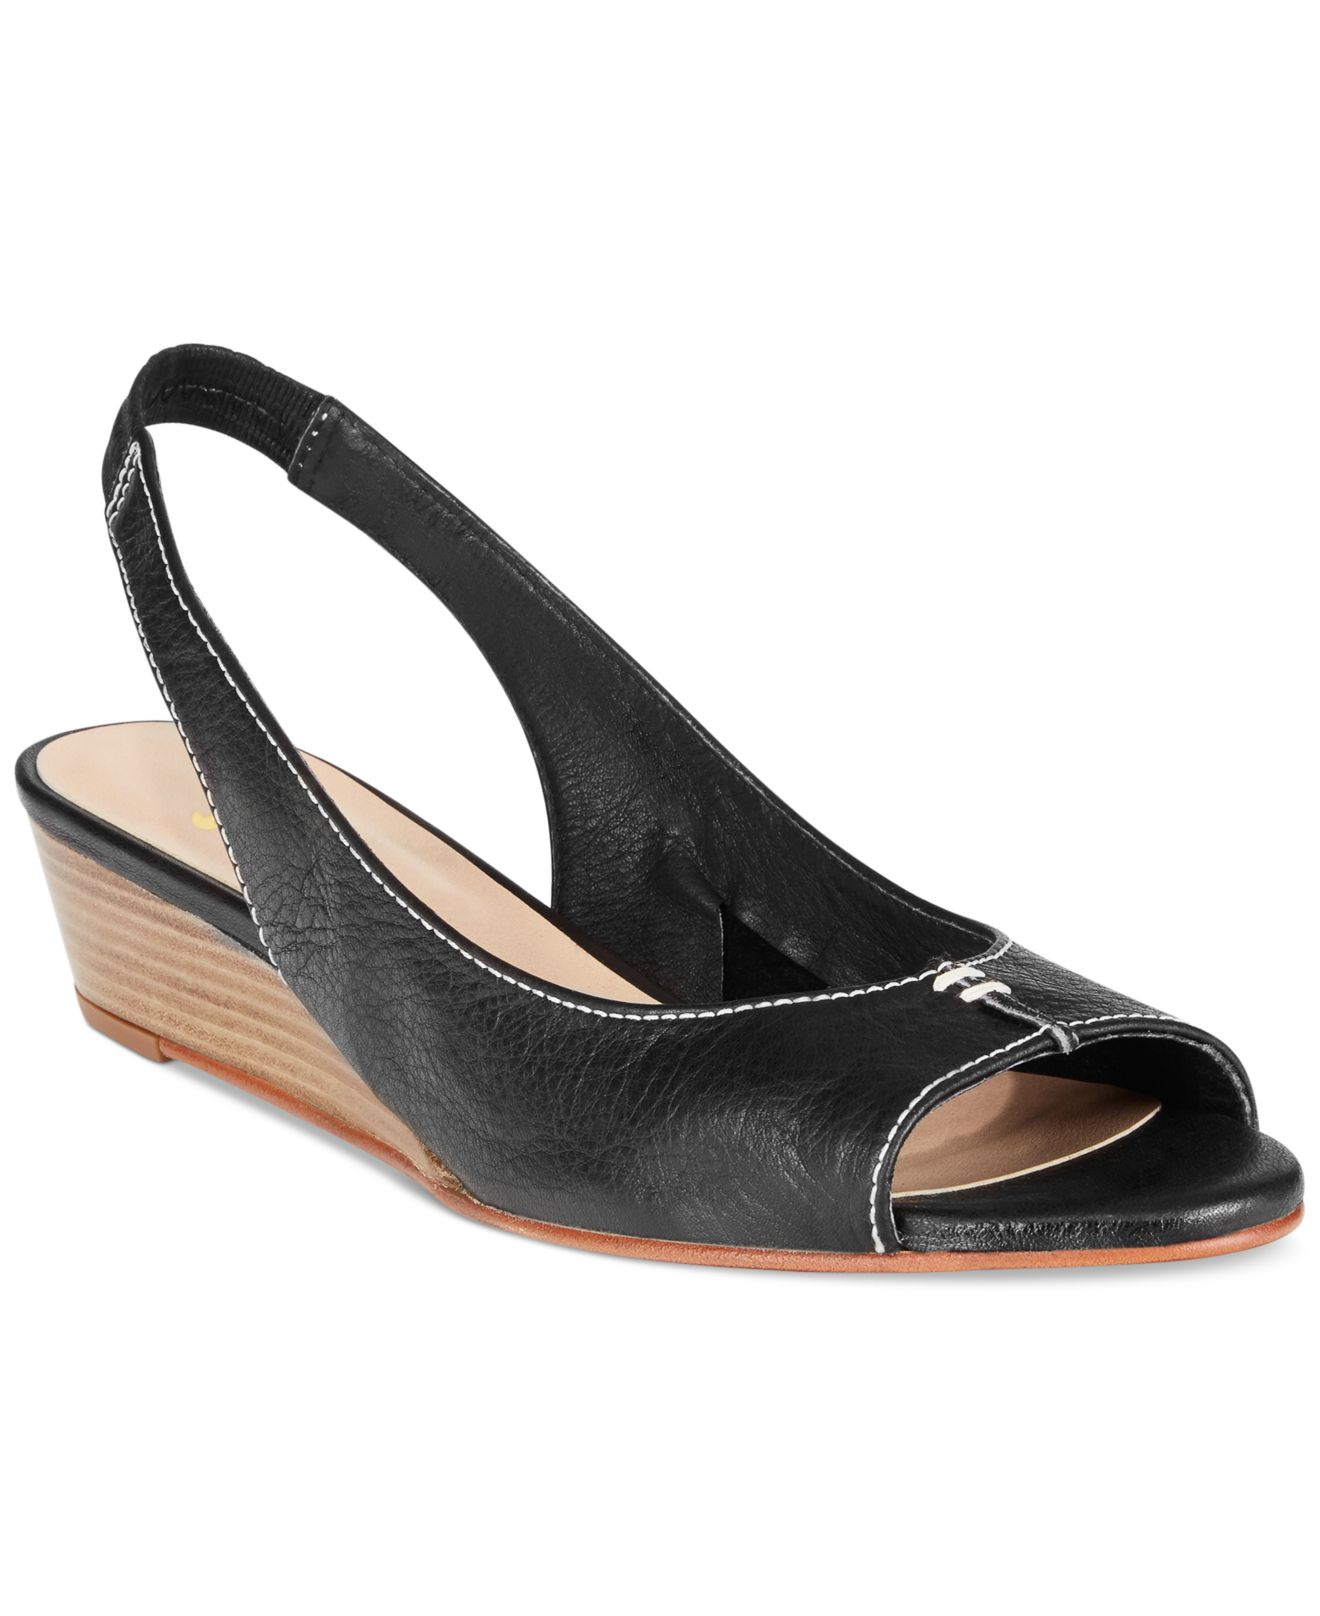 French sole Namely Wedge Sandals in Black | Lyst